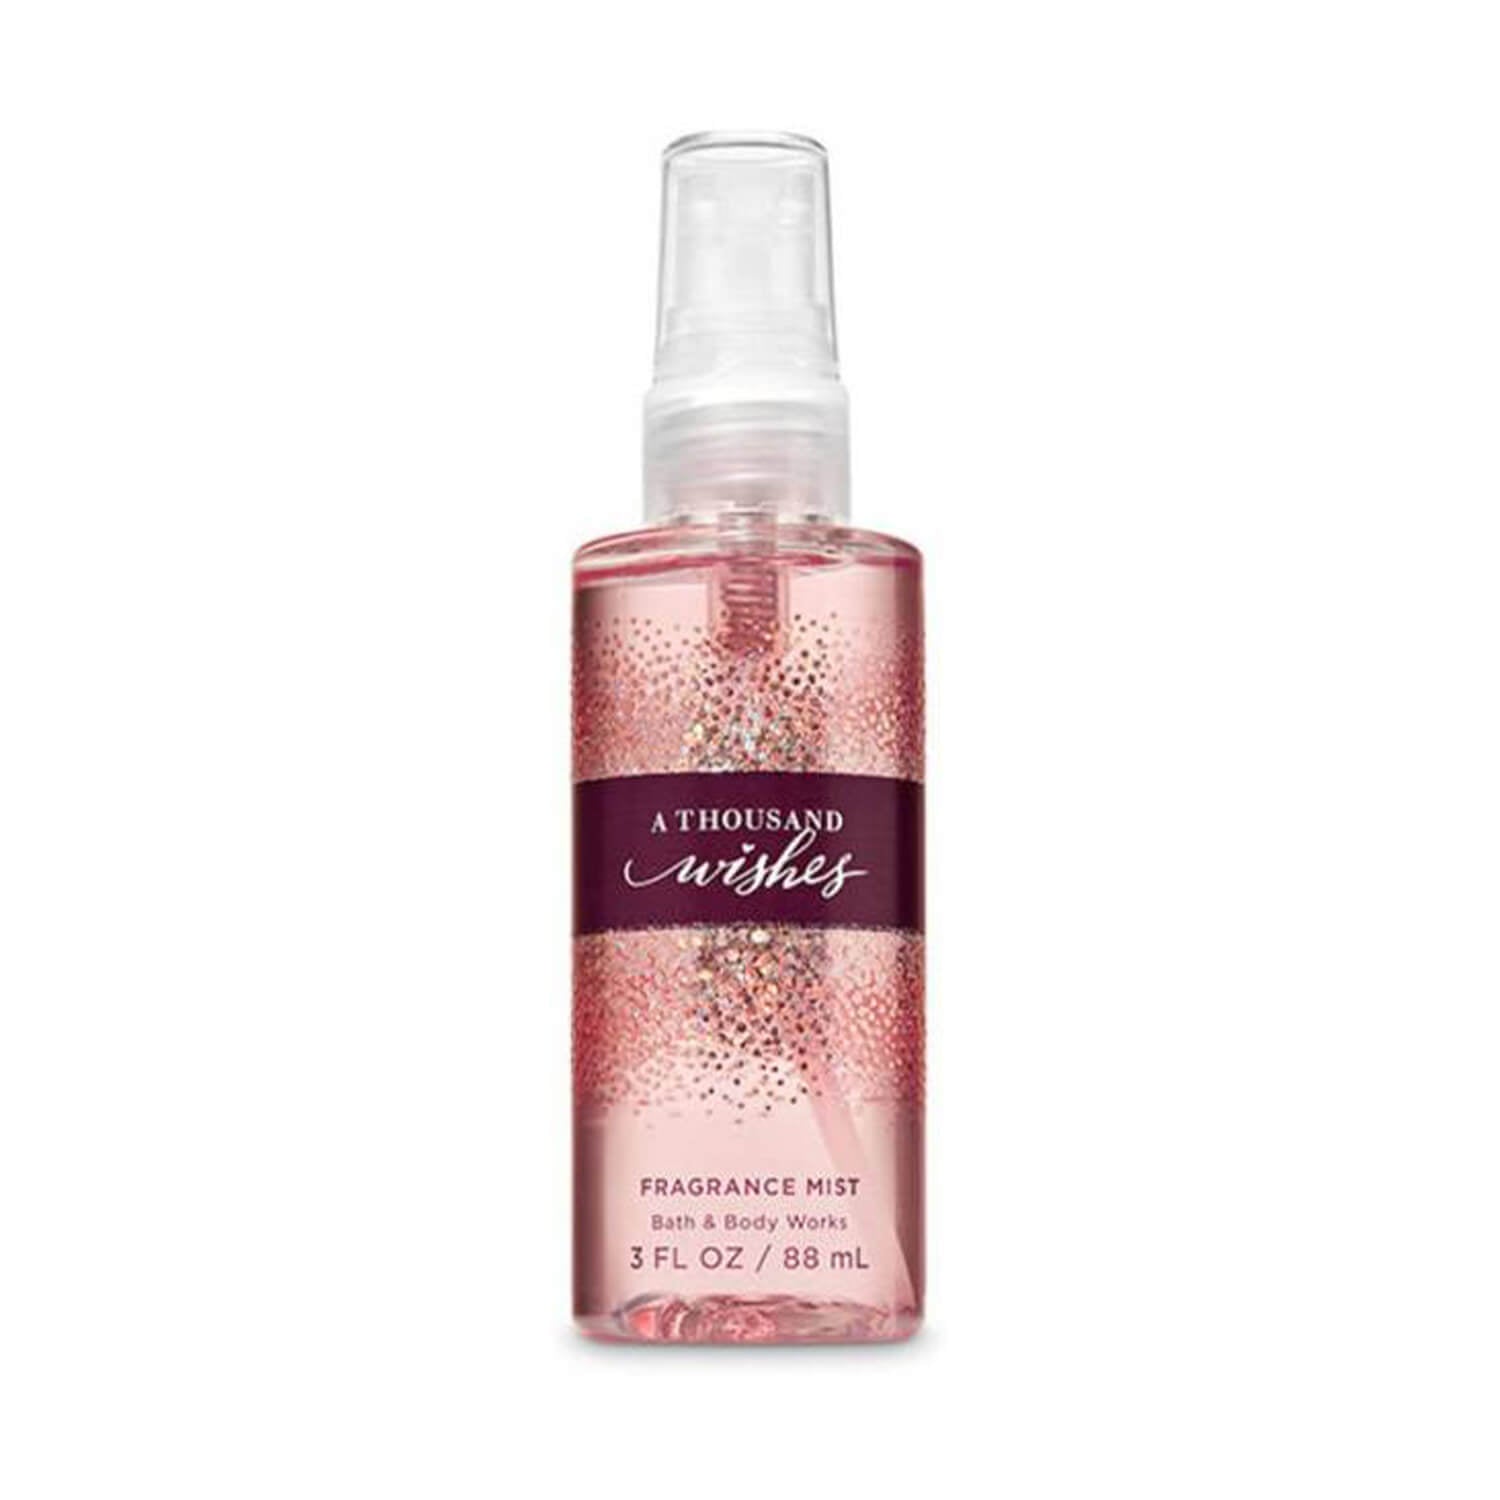 shop bath and body works mist travel size in thousand wishes fragrance at heygirl.pk for delivery in Pakistan